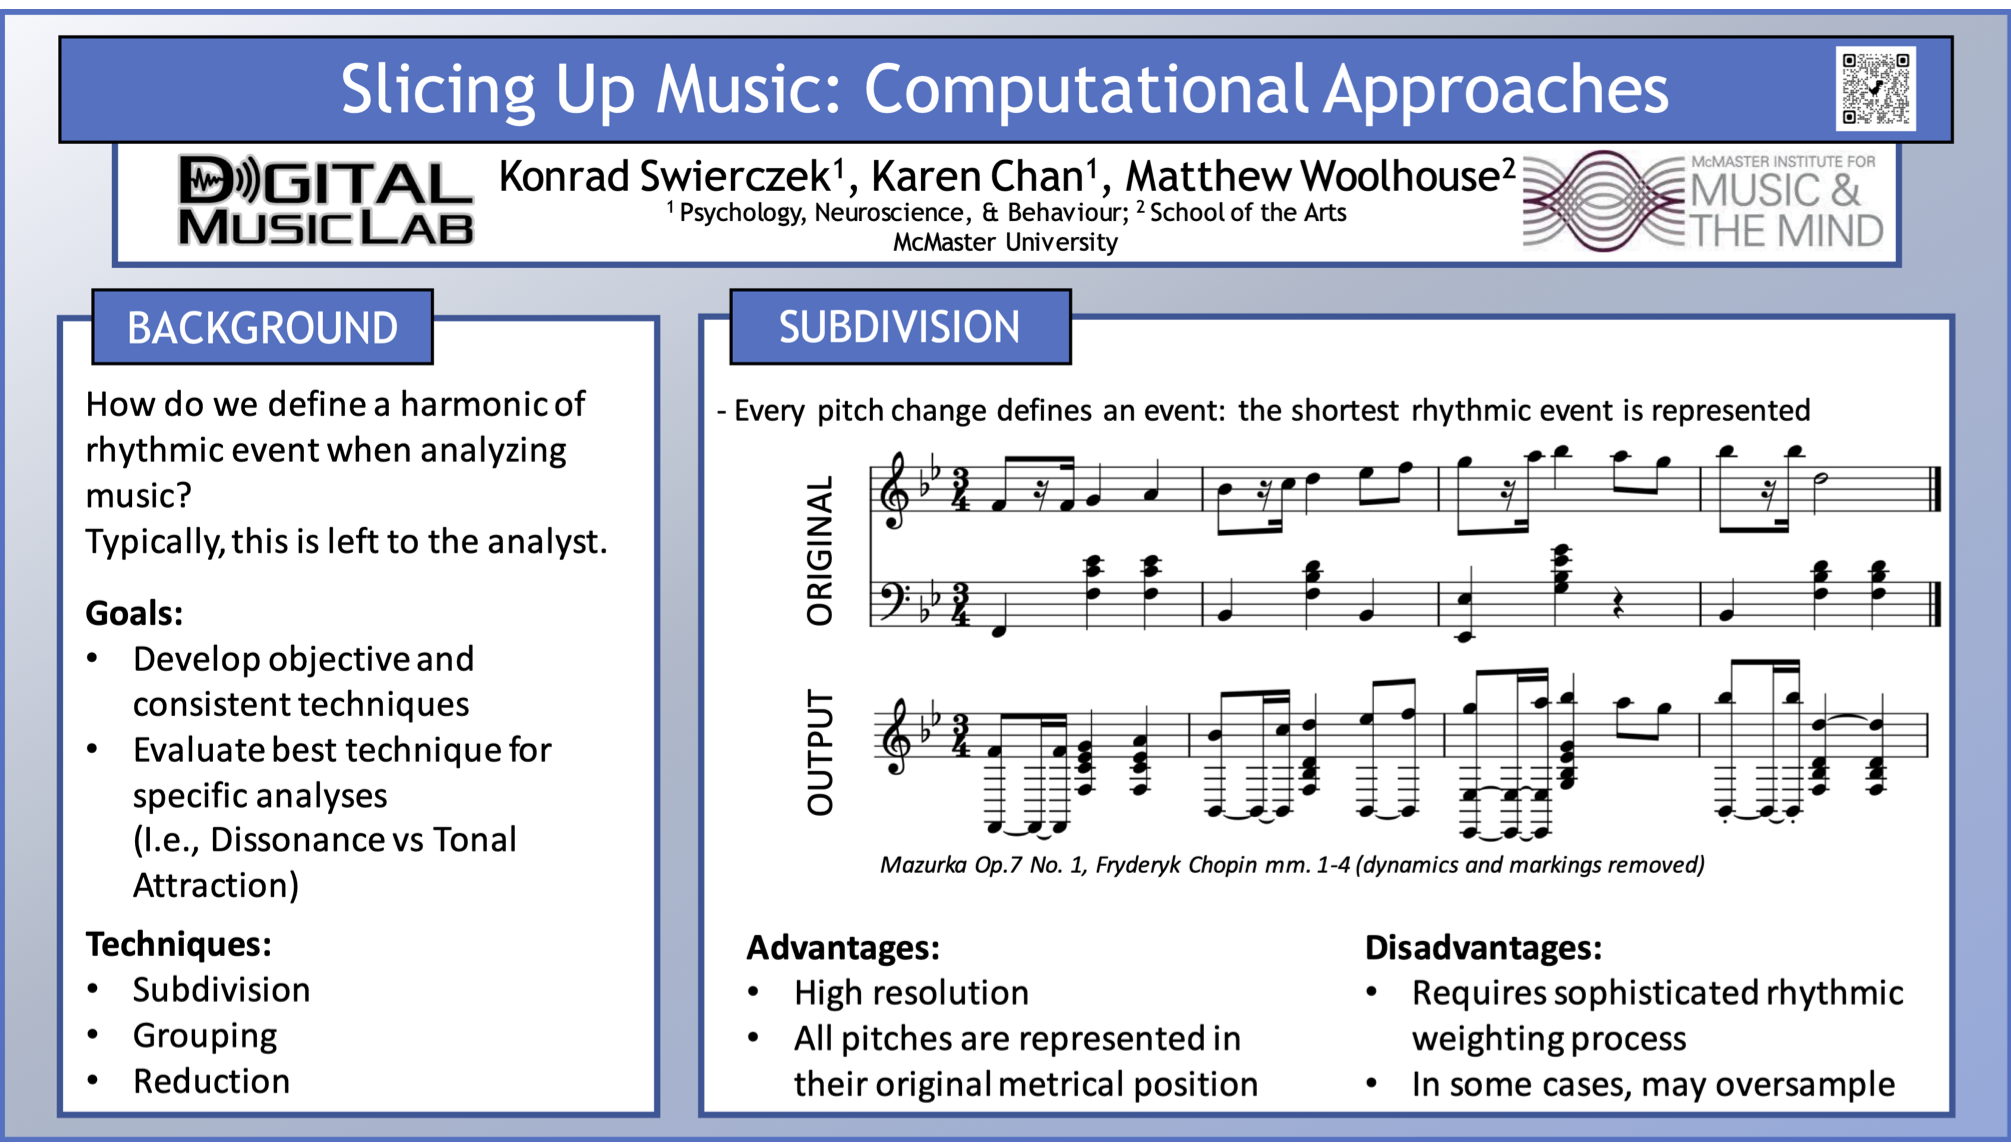 Part 1 of 3 of the Poster for Slicing up music: Computational Approaches